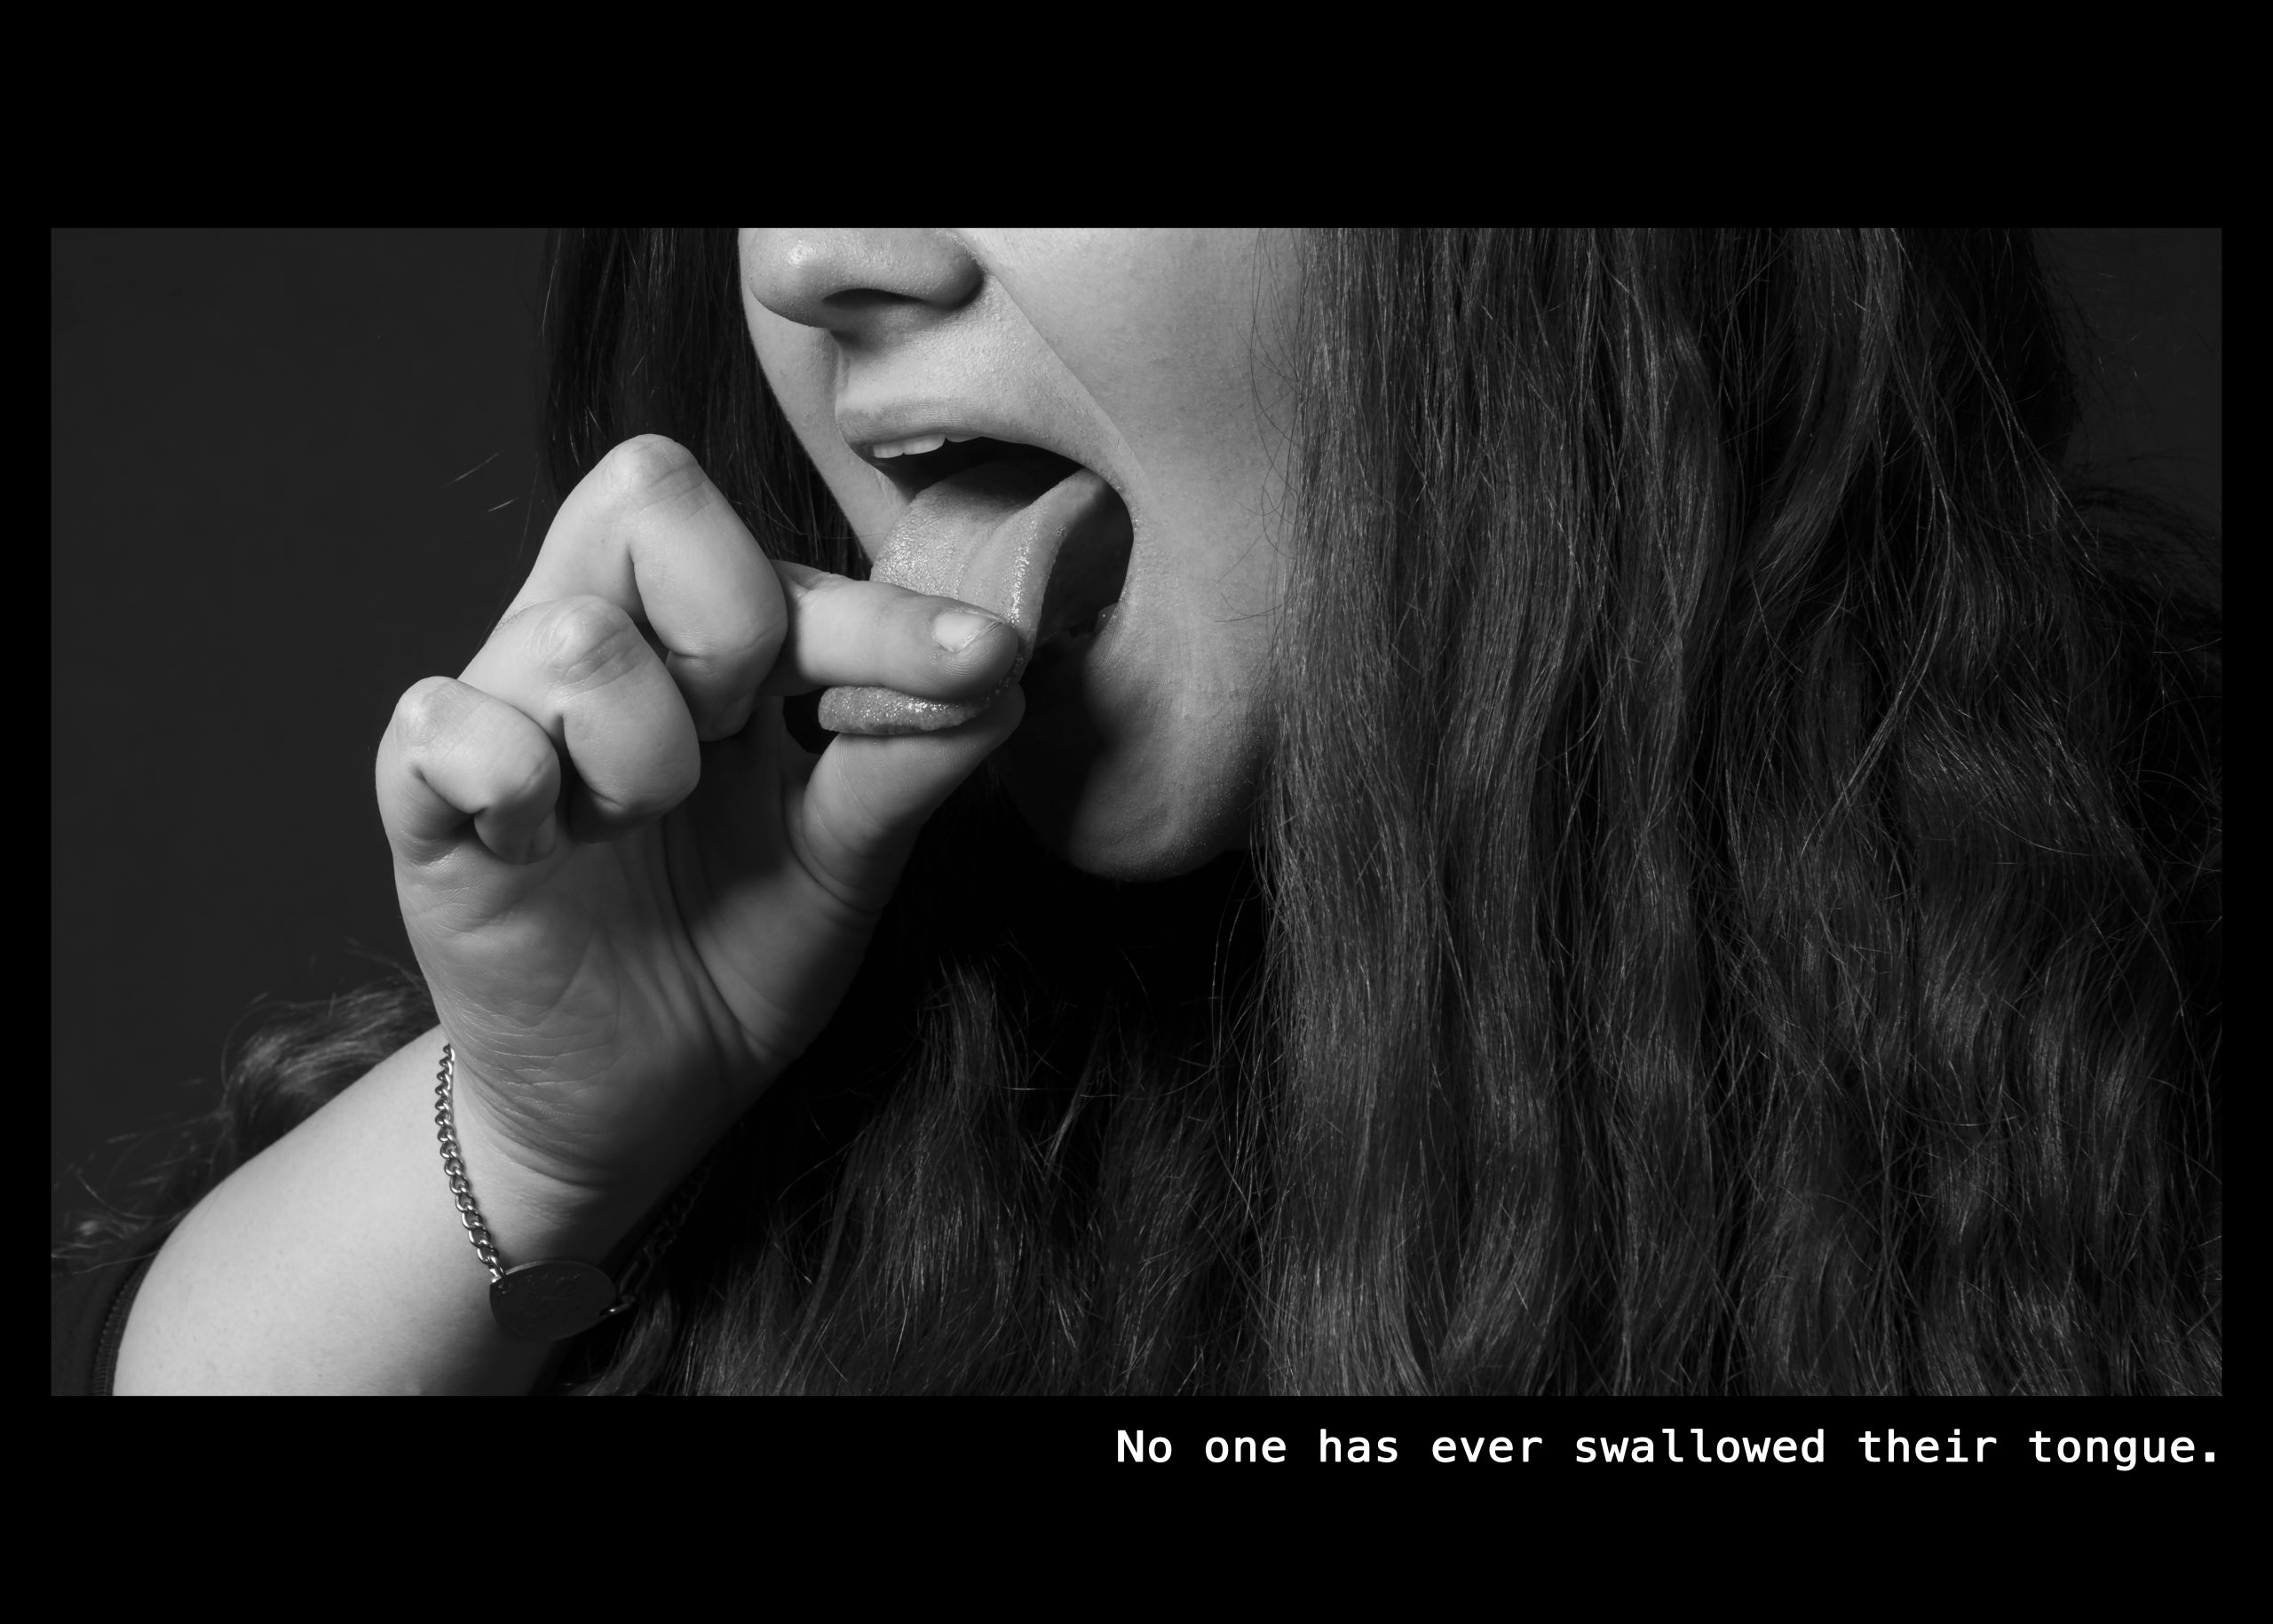 Image of a woman holding her tongue out. Text: No one has ever swallowed their tongue.